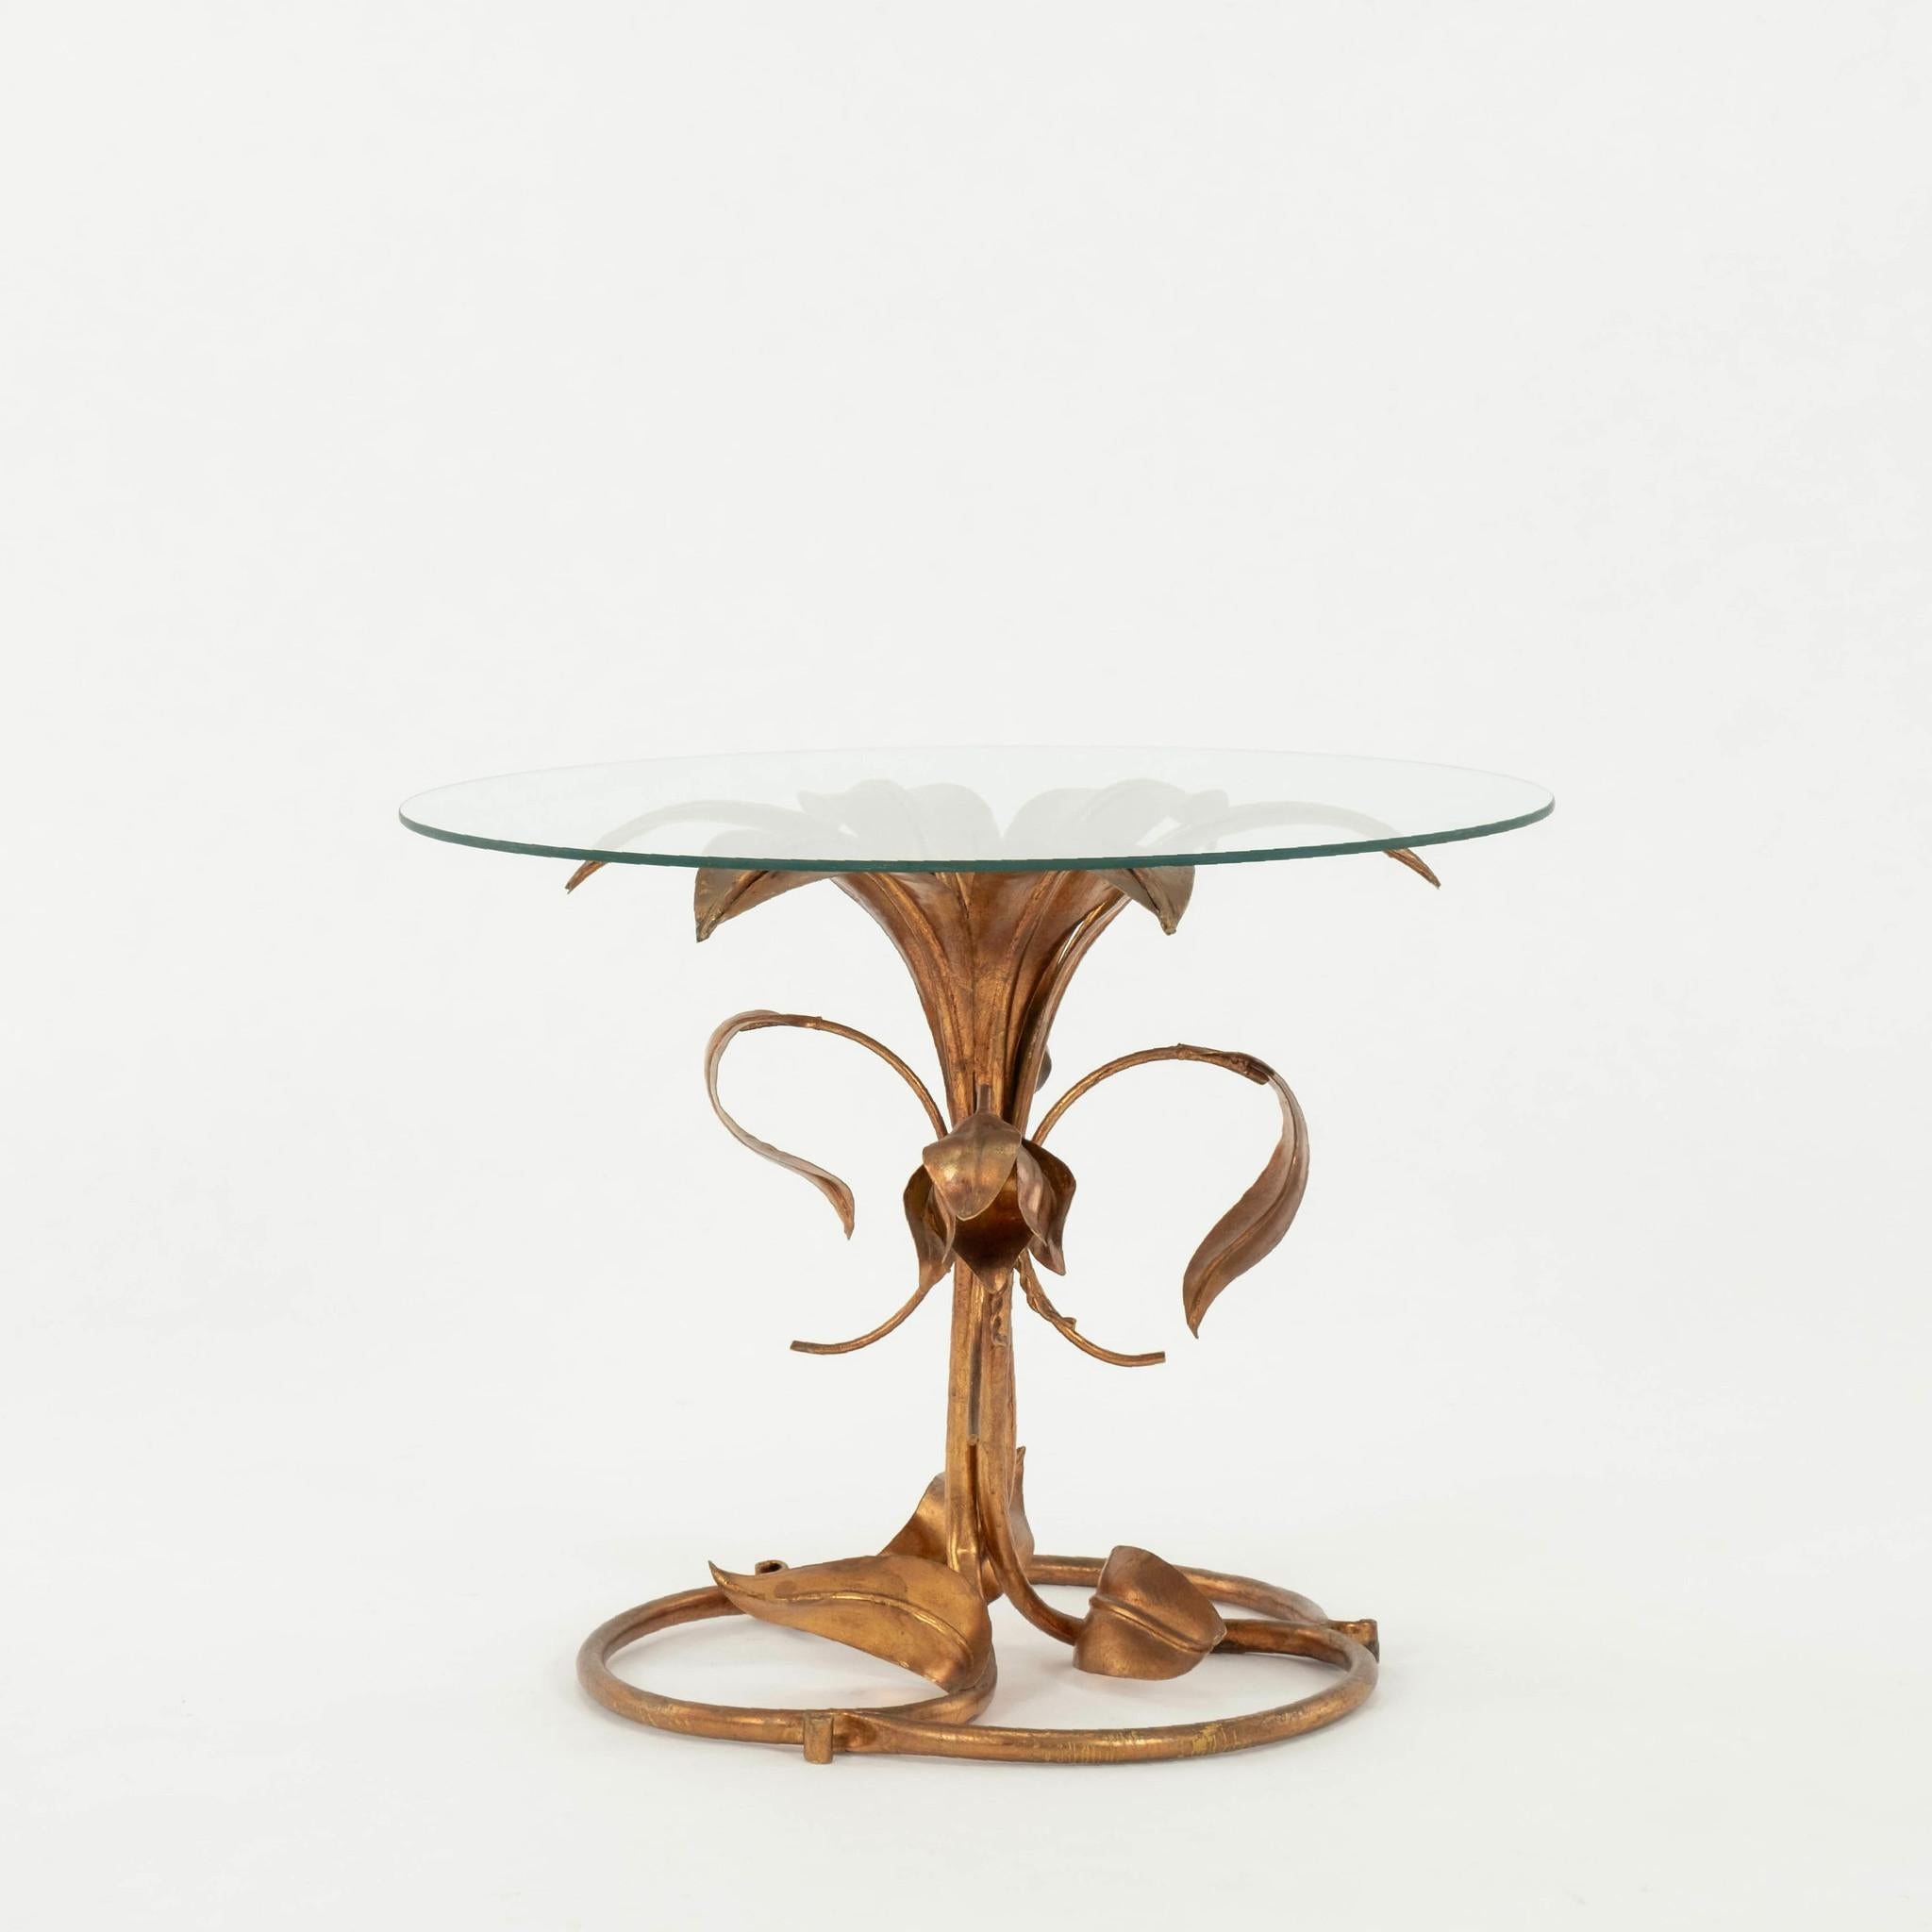 Vintage Italian gilt metal lily table with glass top.